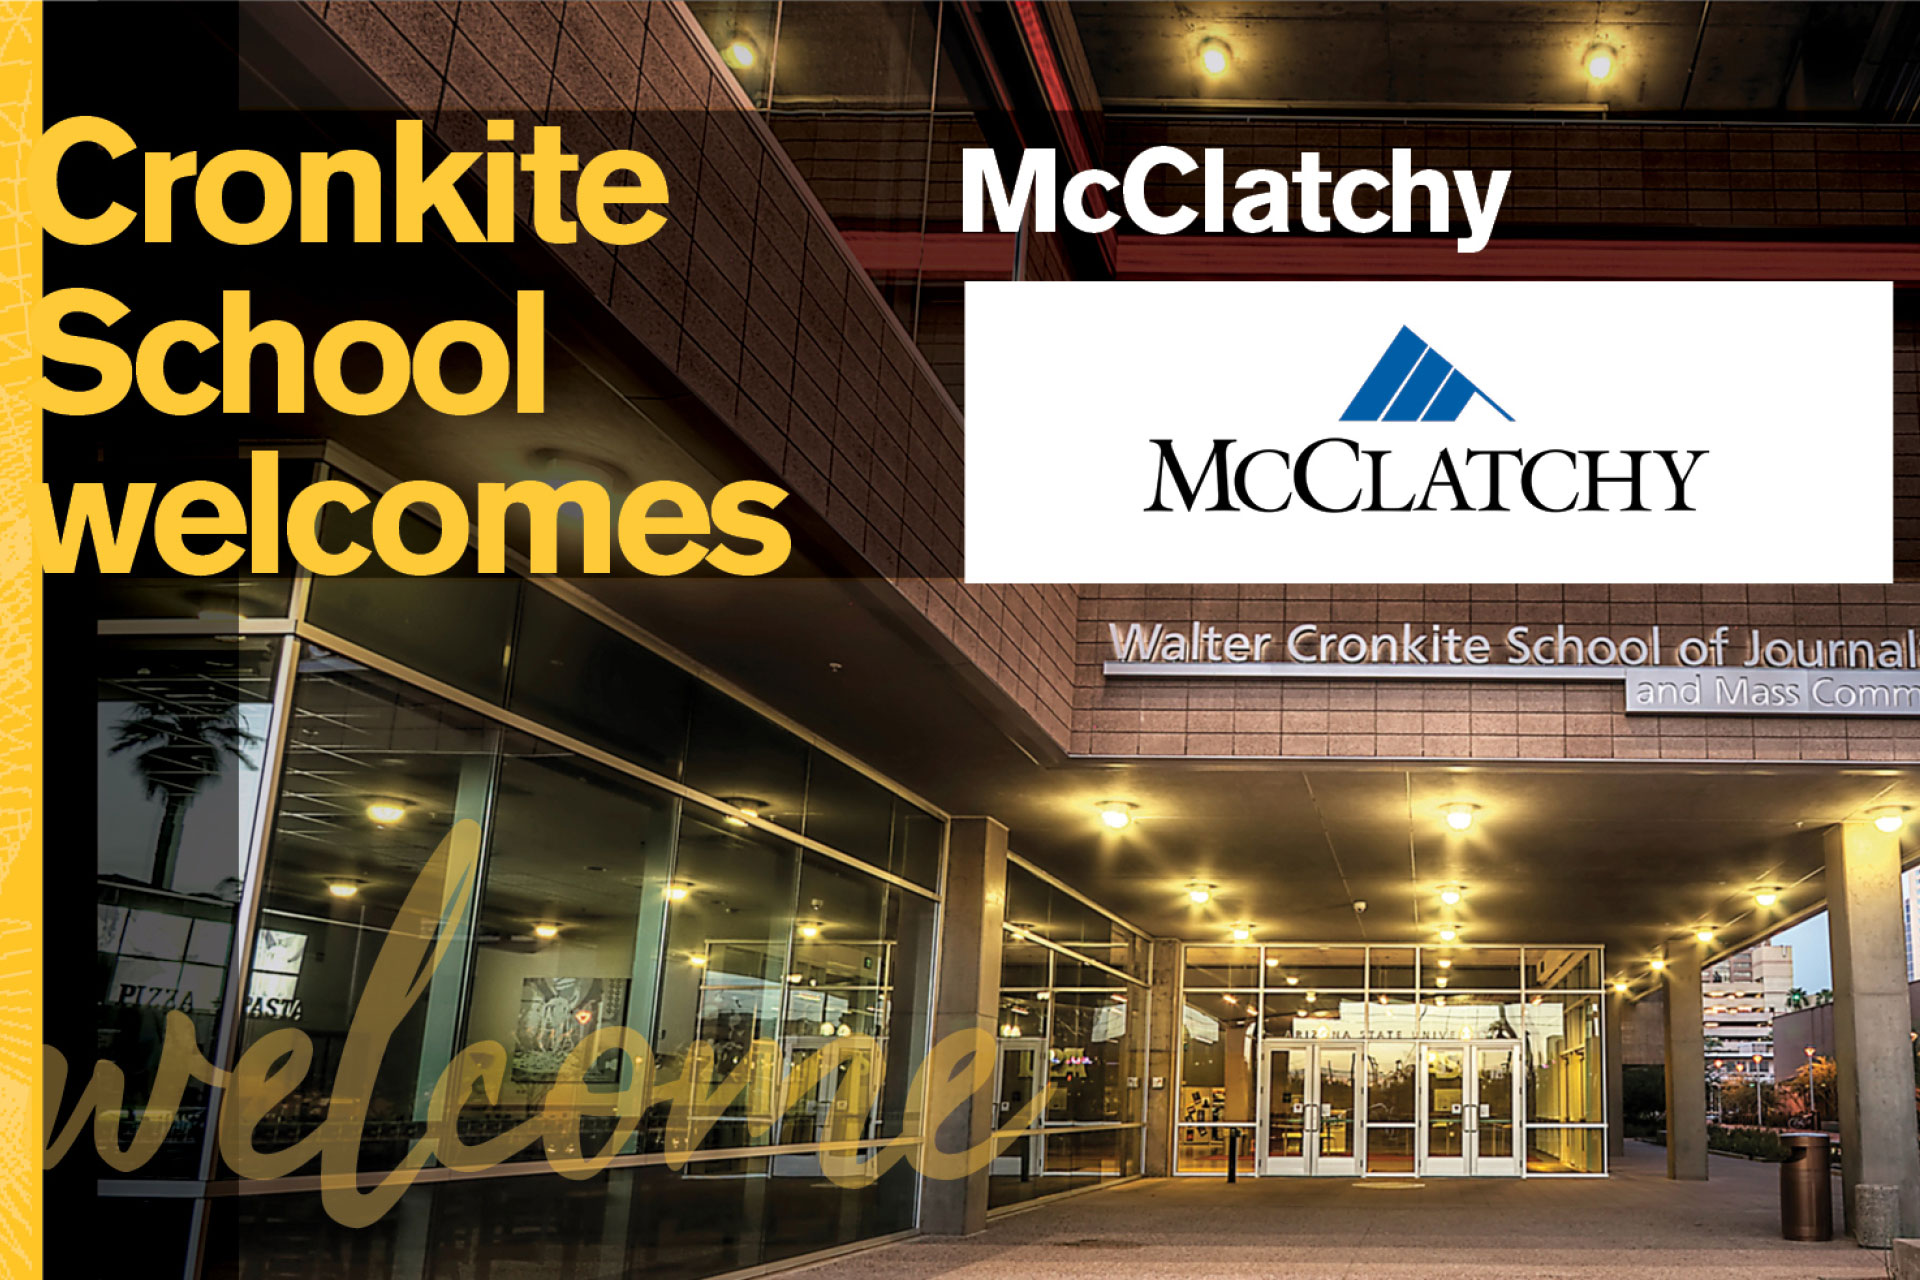 Cronkite Welcomes McClatchy